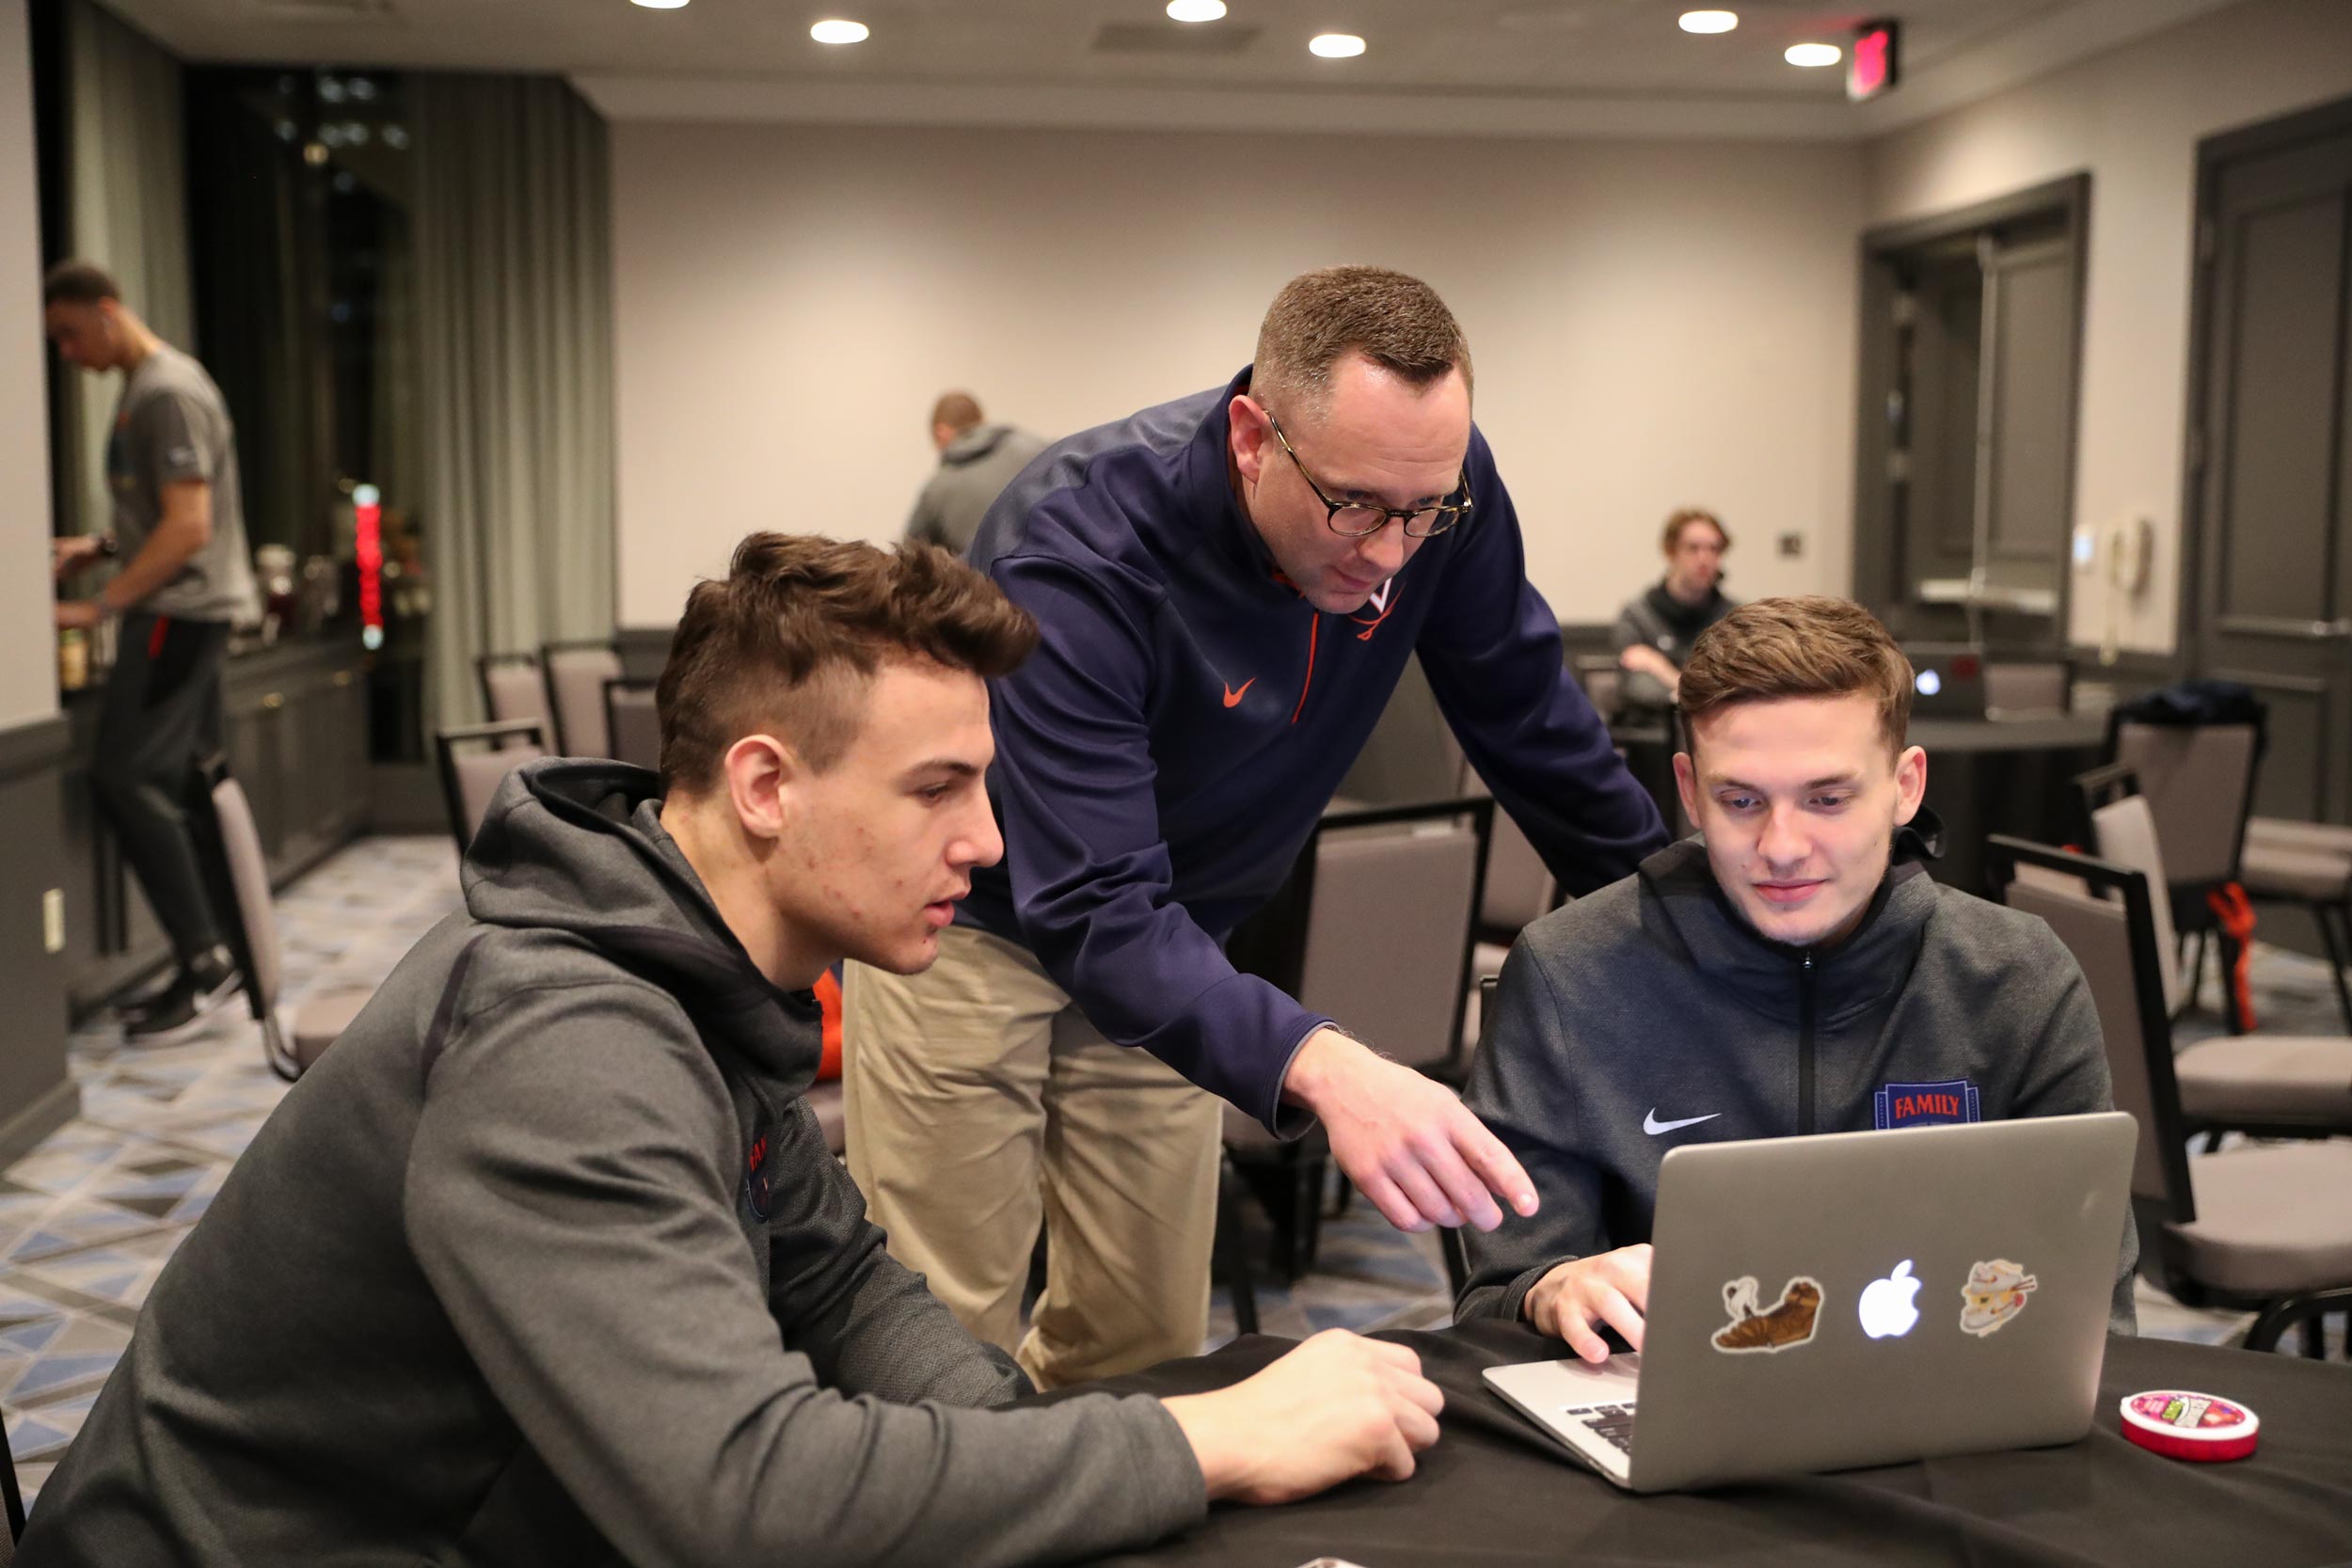 T.J. Grams, center, works with Francisco Caffaro, left, and Kyle Guy on a computer